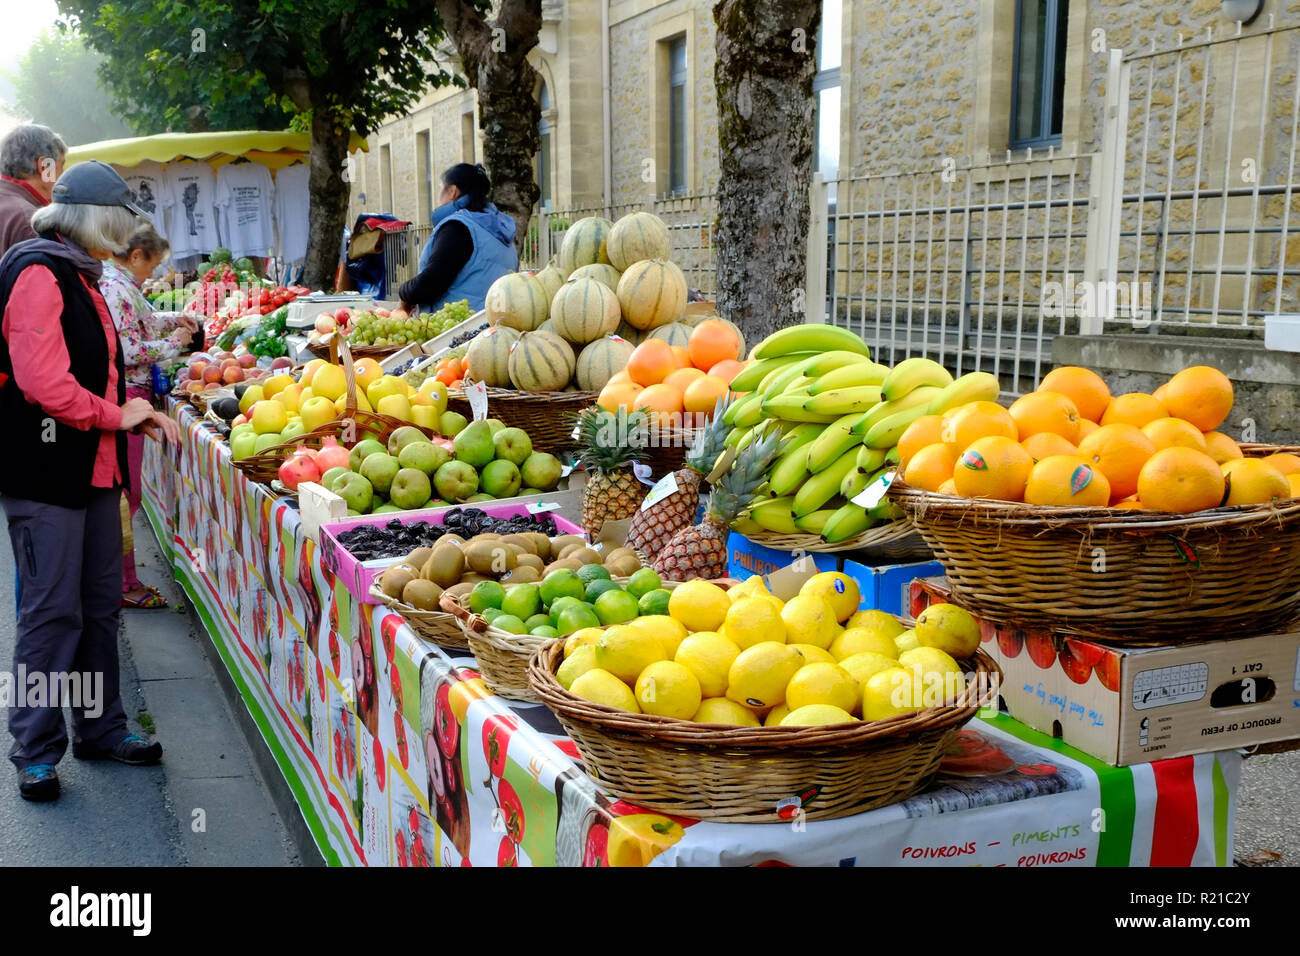 St-Cyprien, Dordogne, France - 24th September 2015: Colourful fruit and vegetables displayed during the Sunday street market in St-Cyprien, Dordogne, France Stock Photo